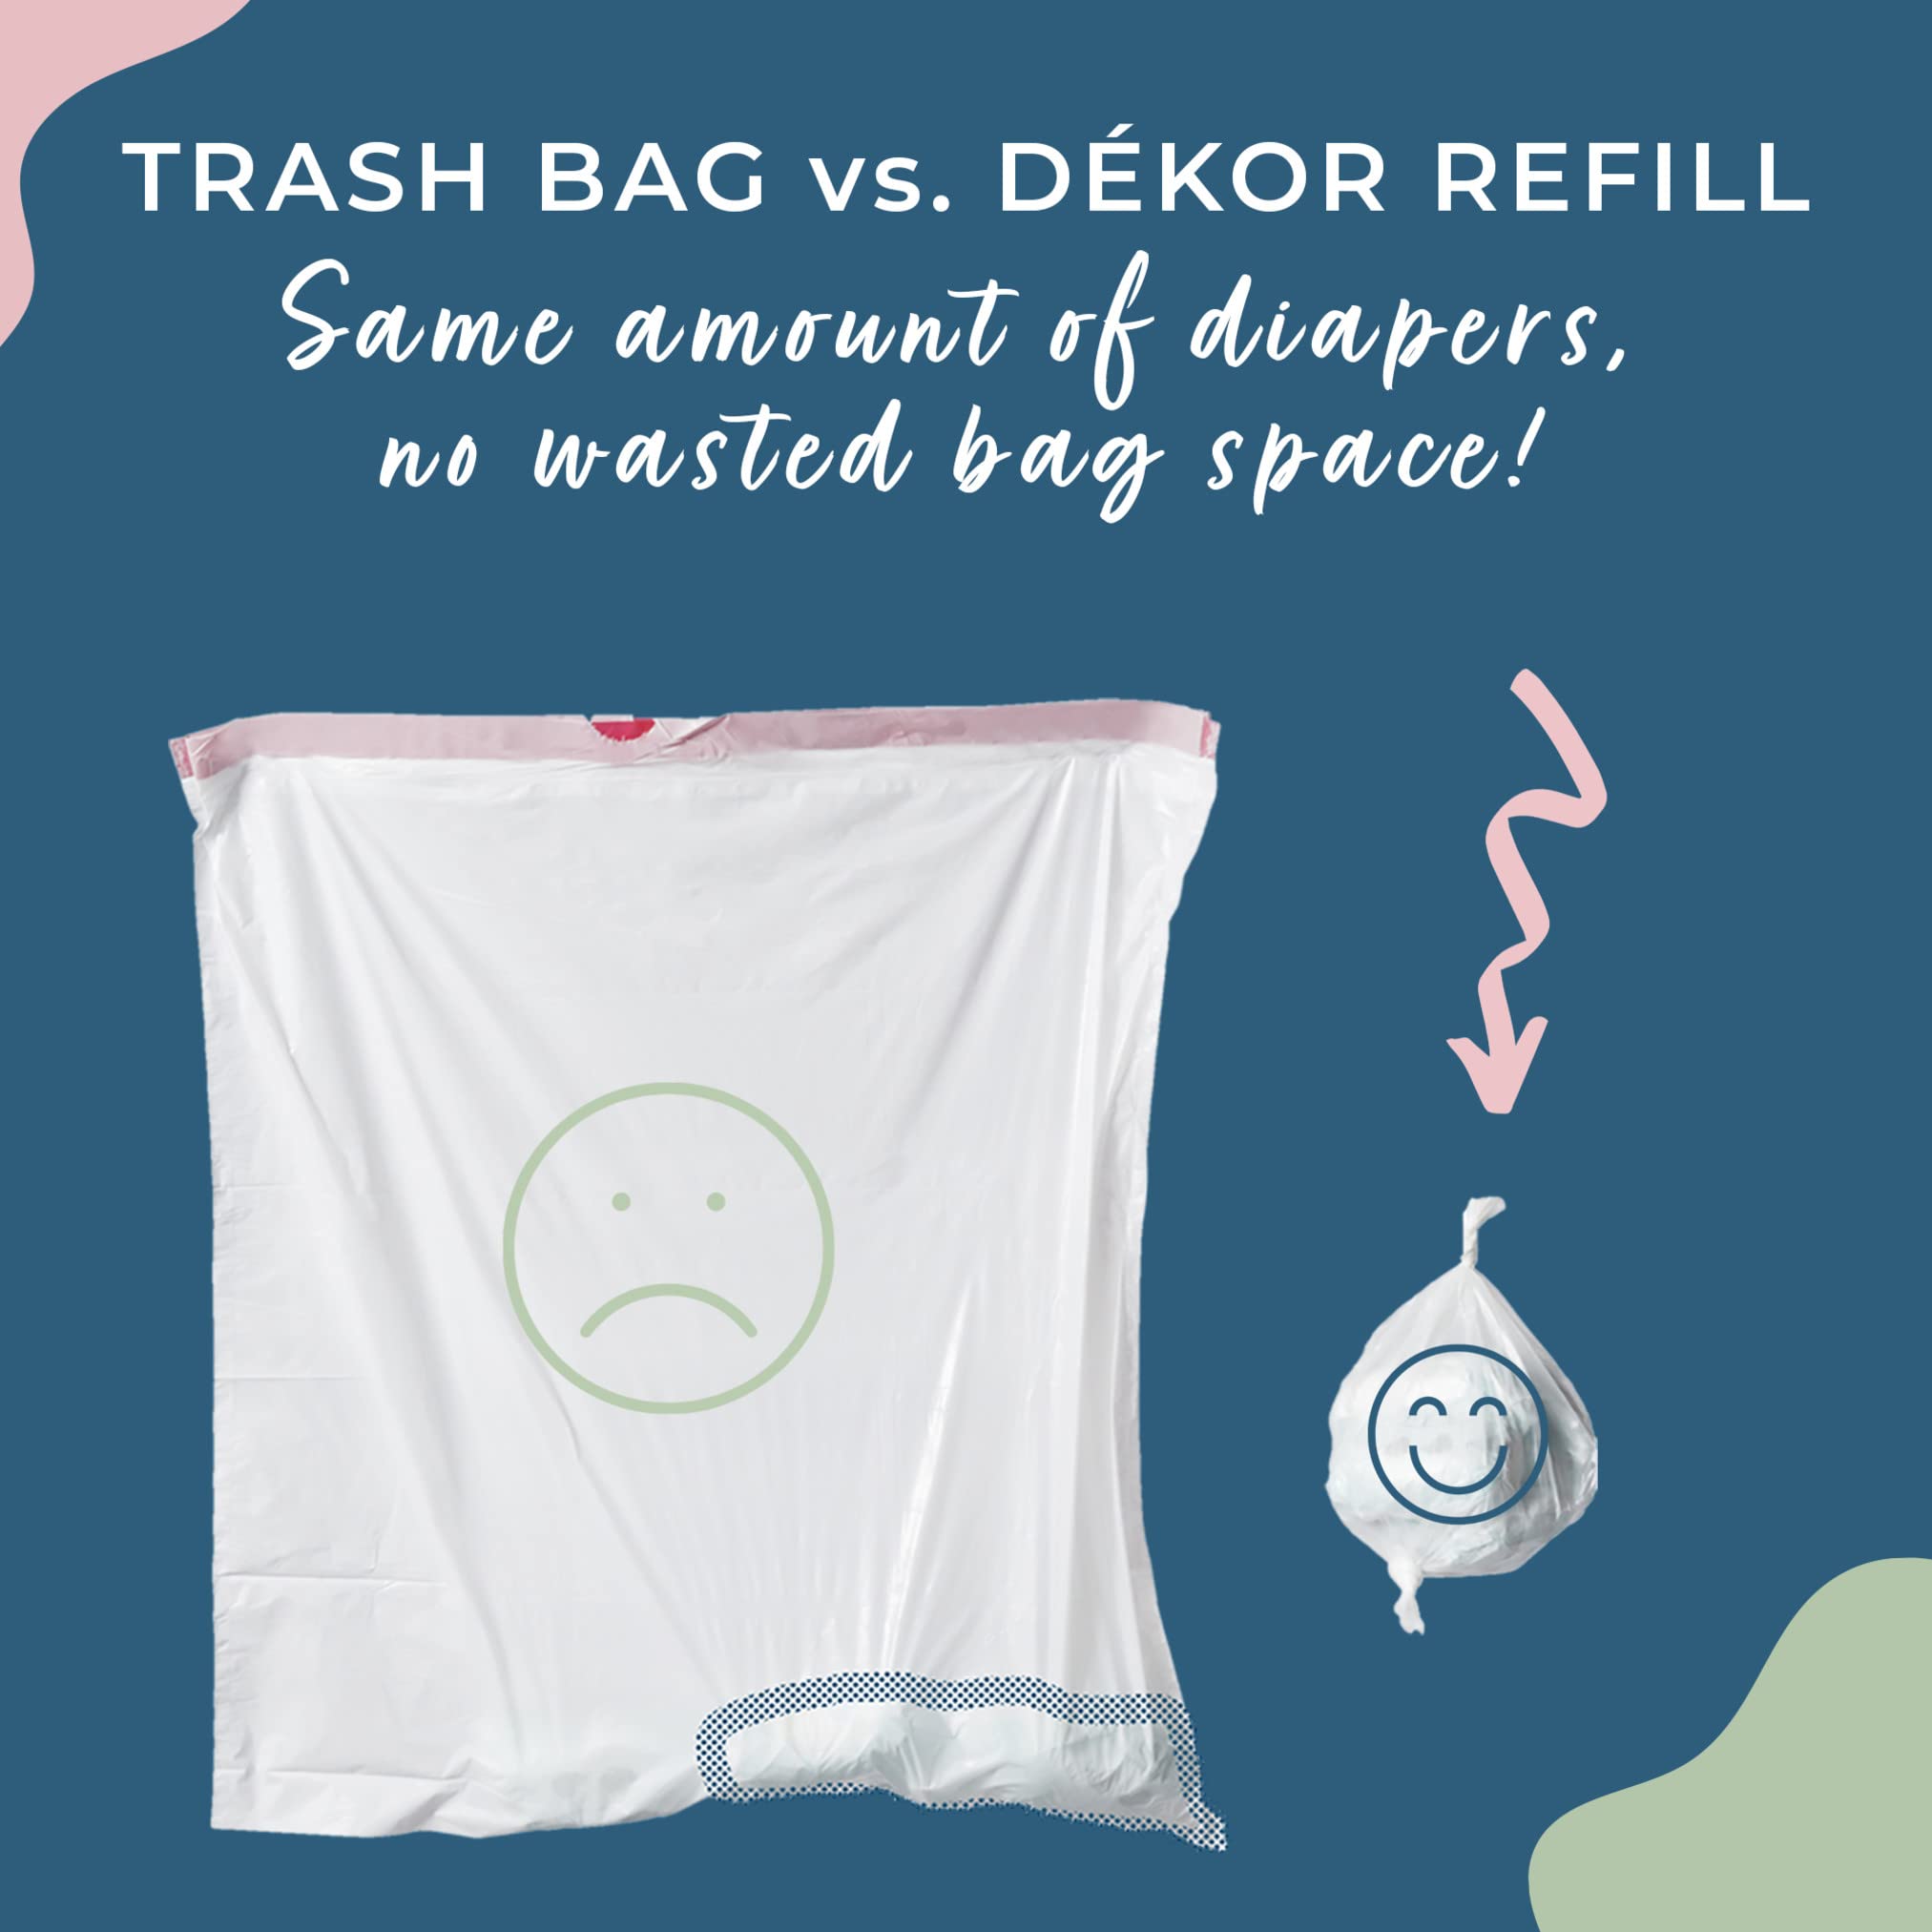 Dekor Mini Diaper Pail Refills | 2 Count | Most Economical Refill System | Quick & Easy to Replace | No Preset Bag Size – Use Only What You Need | Exclusive End-of-Liner Marking | Baby Powder Scent